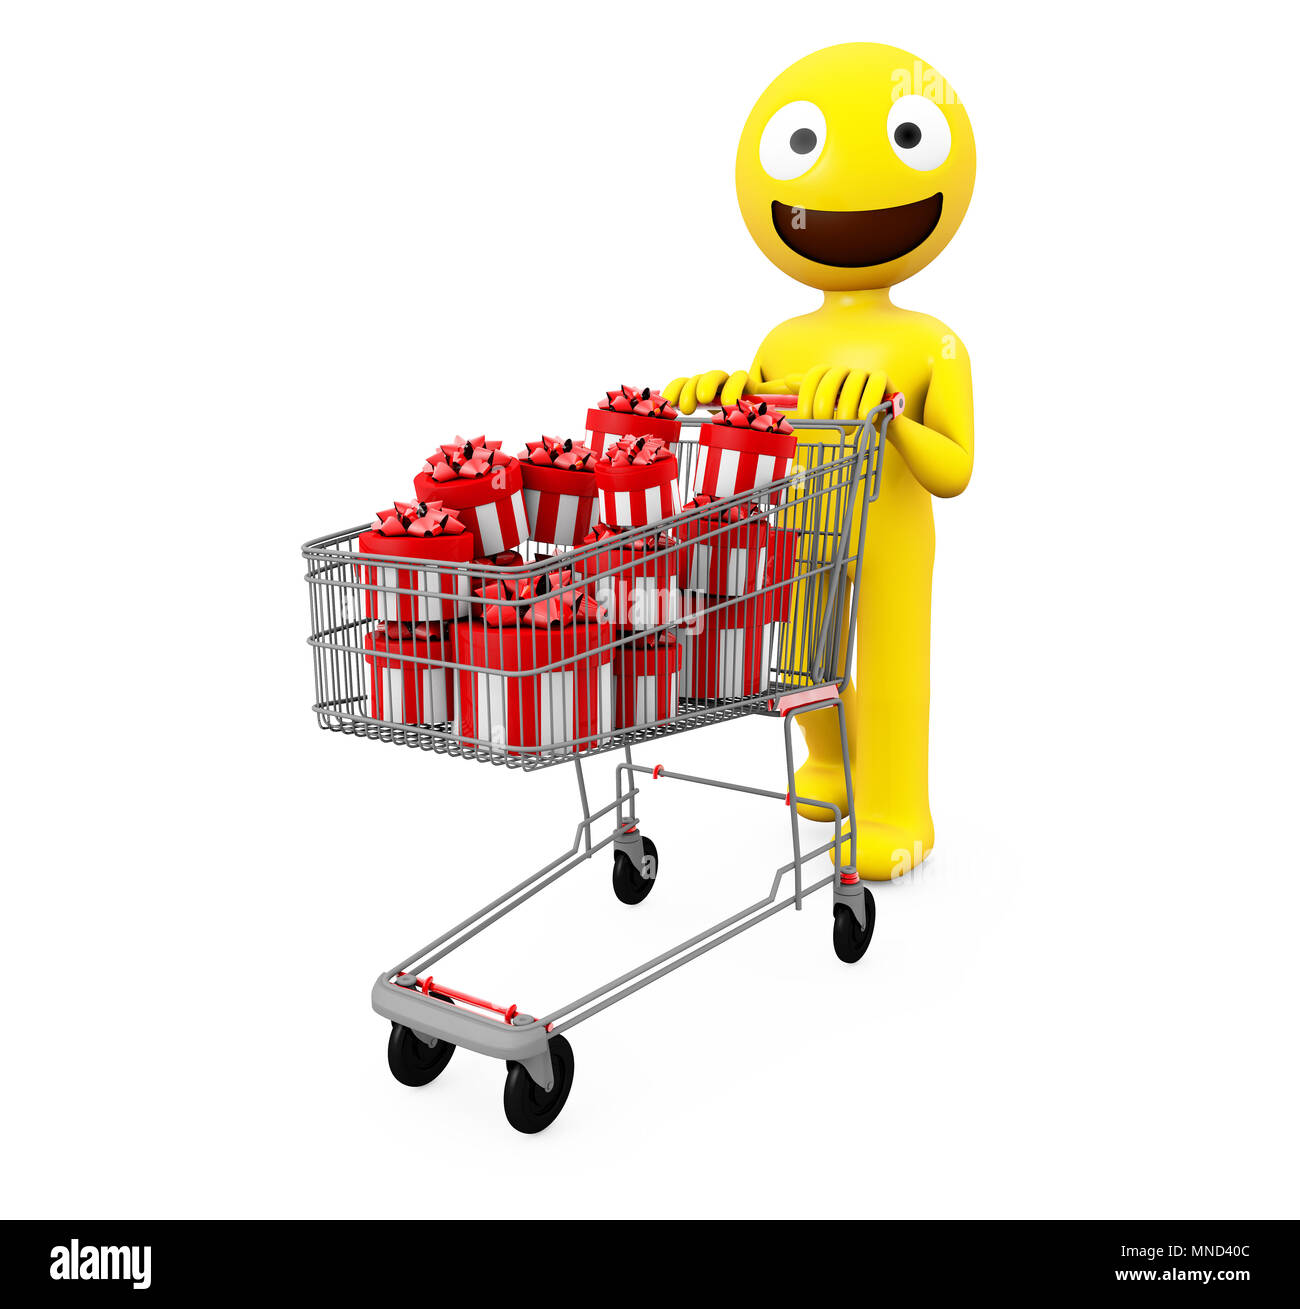 Shopping cart emoji Cut Out Stock Images & Pictures - Alamy